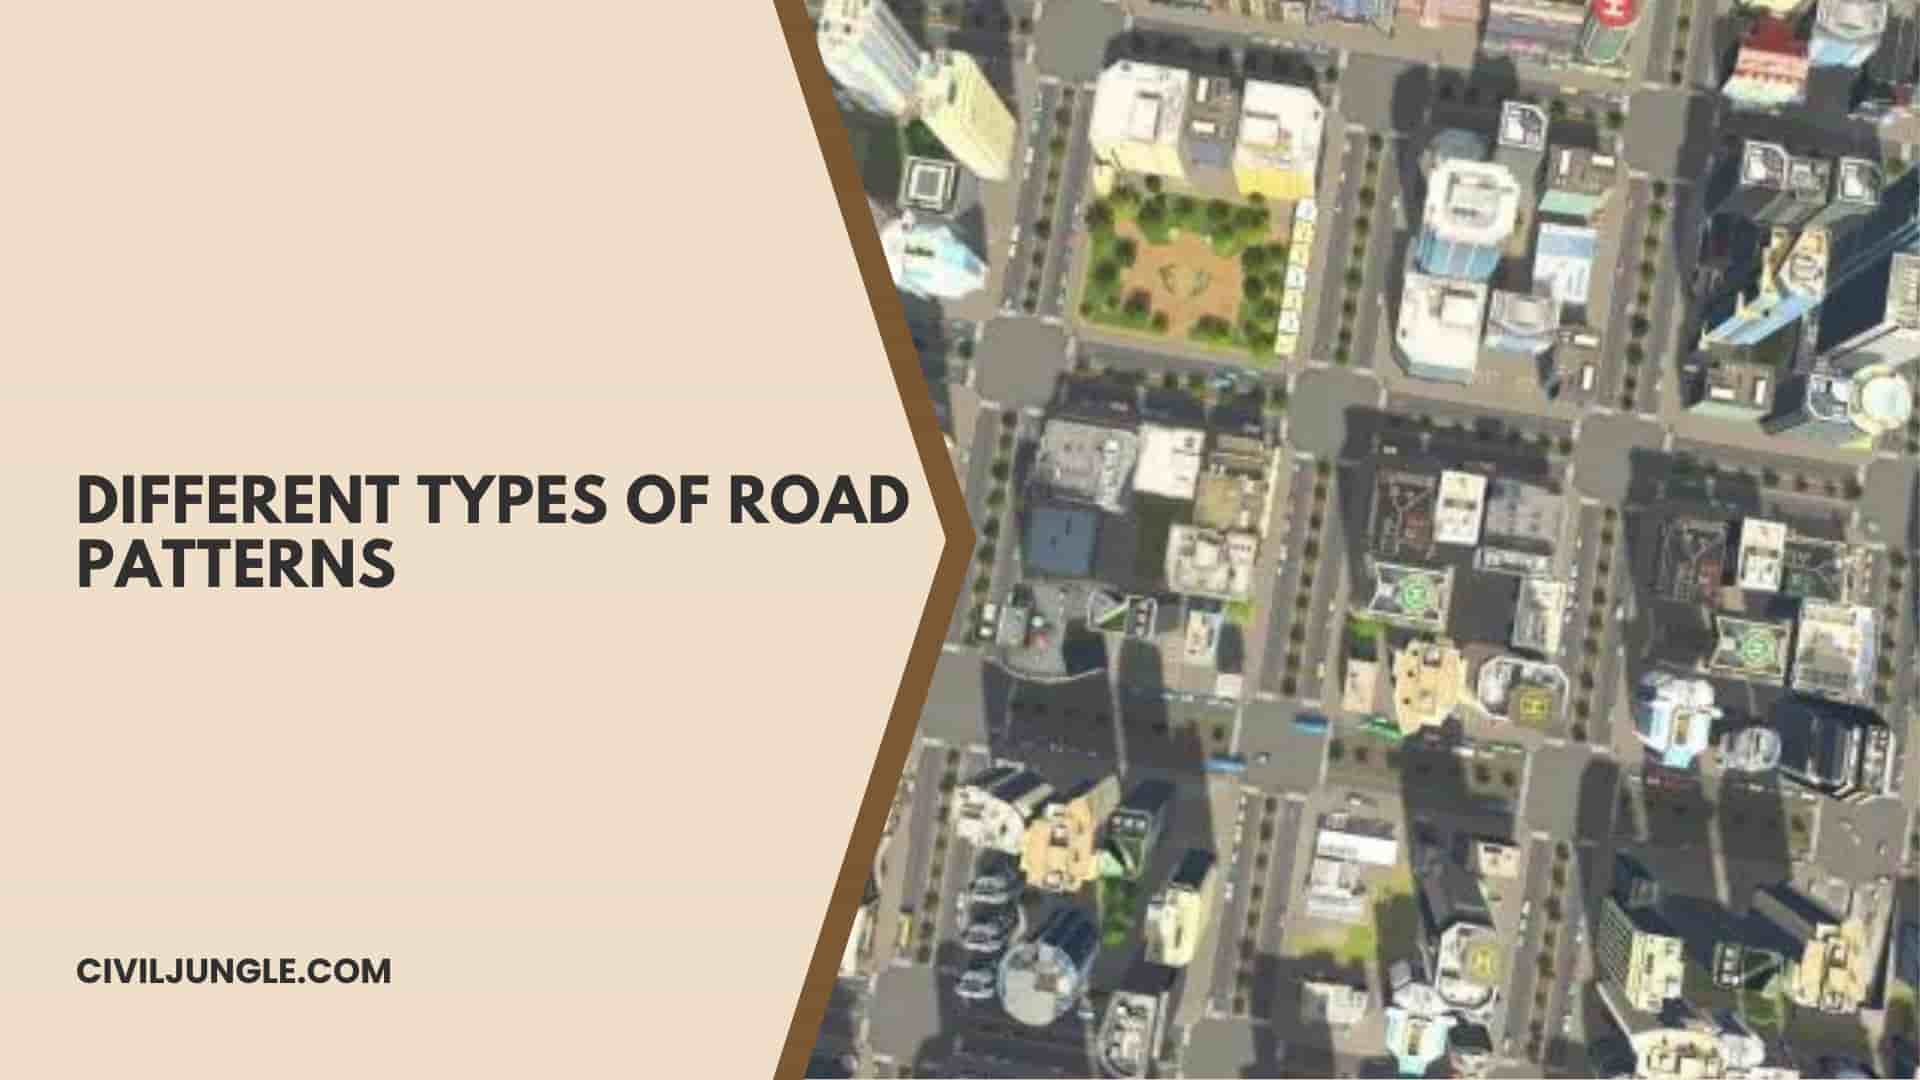 Different Types of Road Patterns